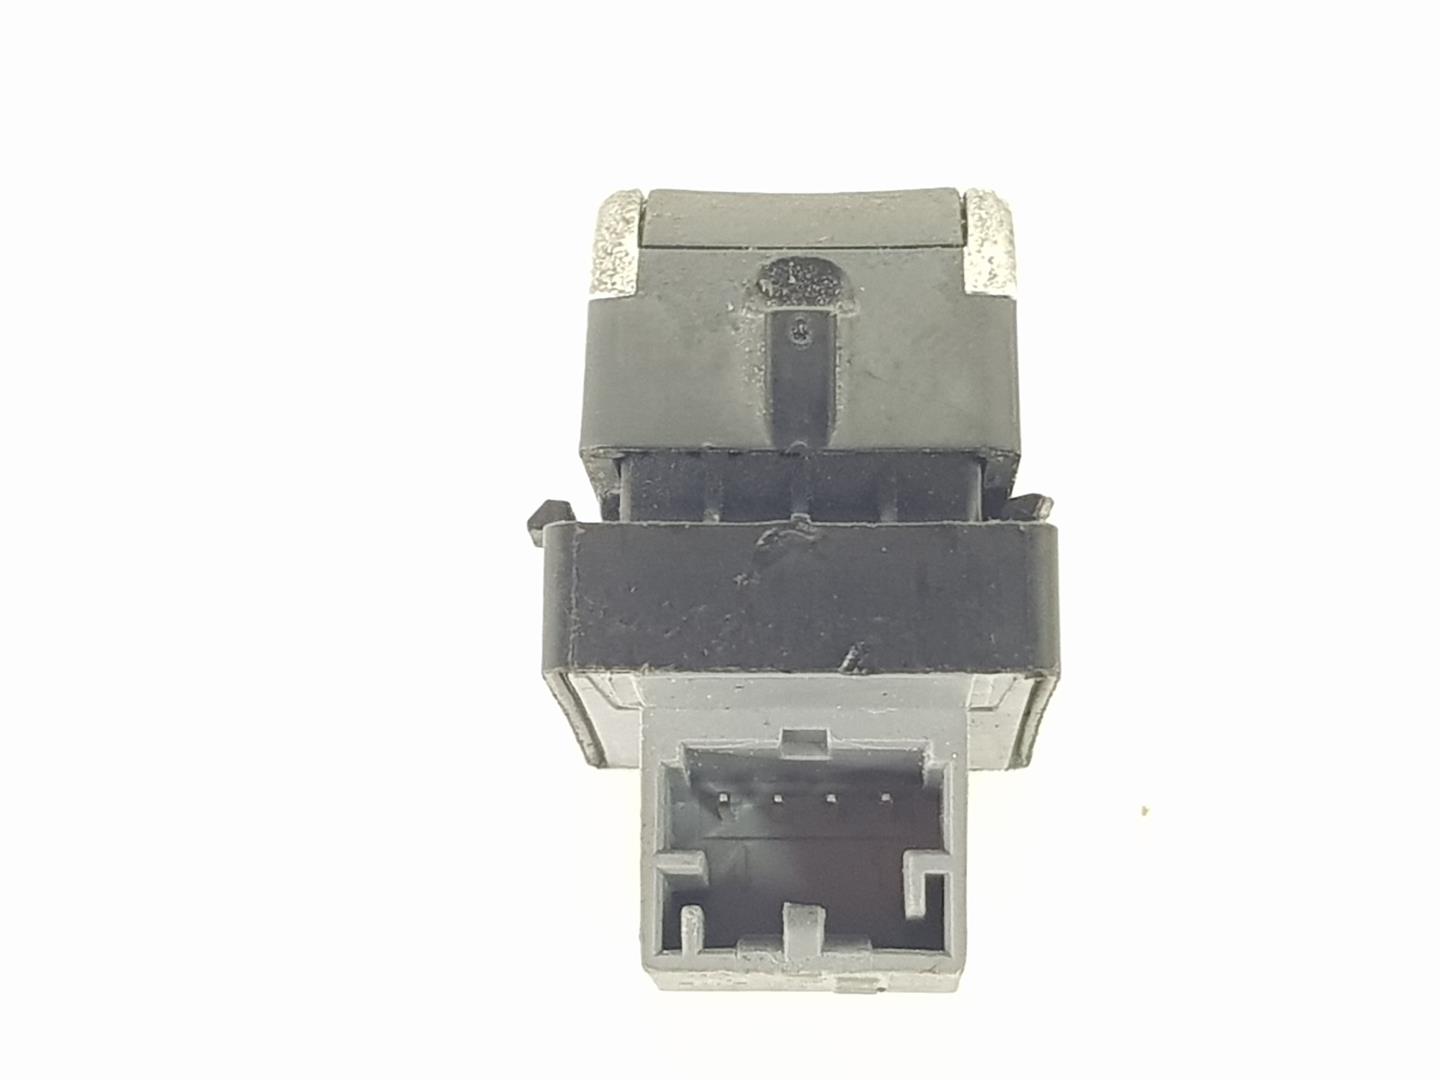 AUDI A6 C7/4G (2010-2020) Rear Right Door Window Control Switch 4H0959855A, 4H0959855A 24157081